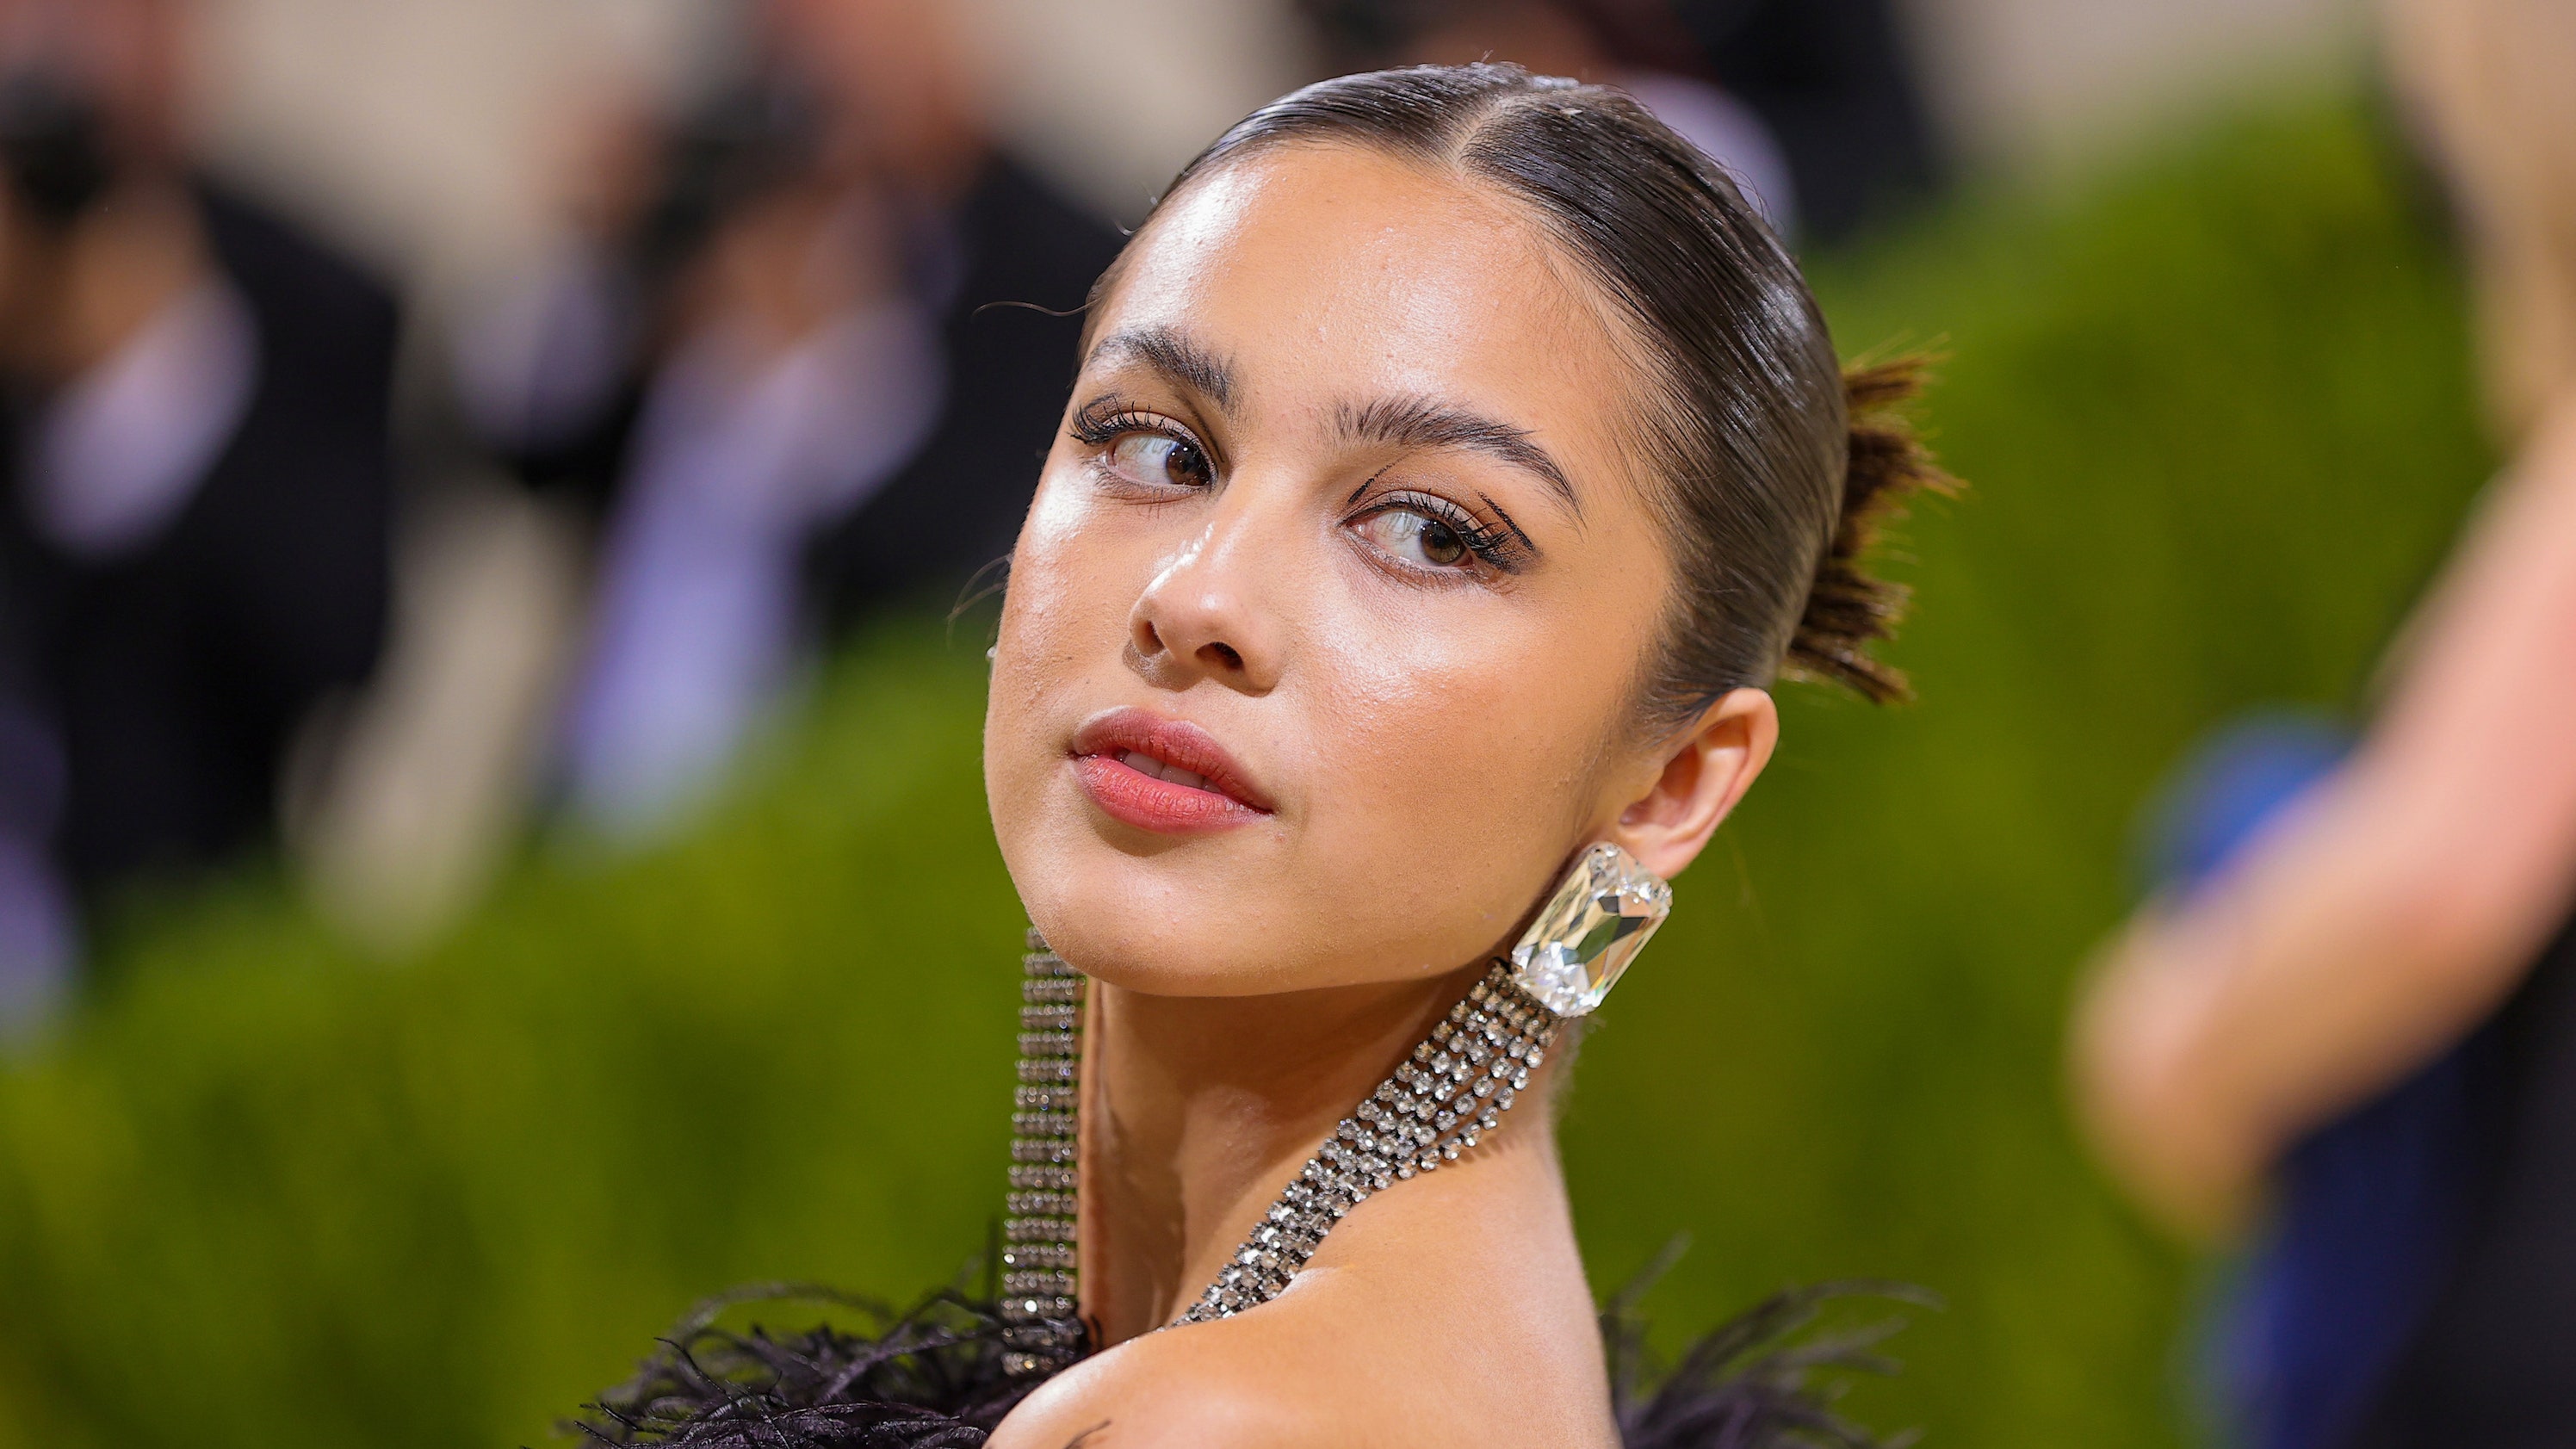 Olivia Rodrigo Nails Her First Met Gala Look With an Elevated Rocker Beauty Look